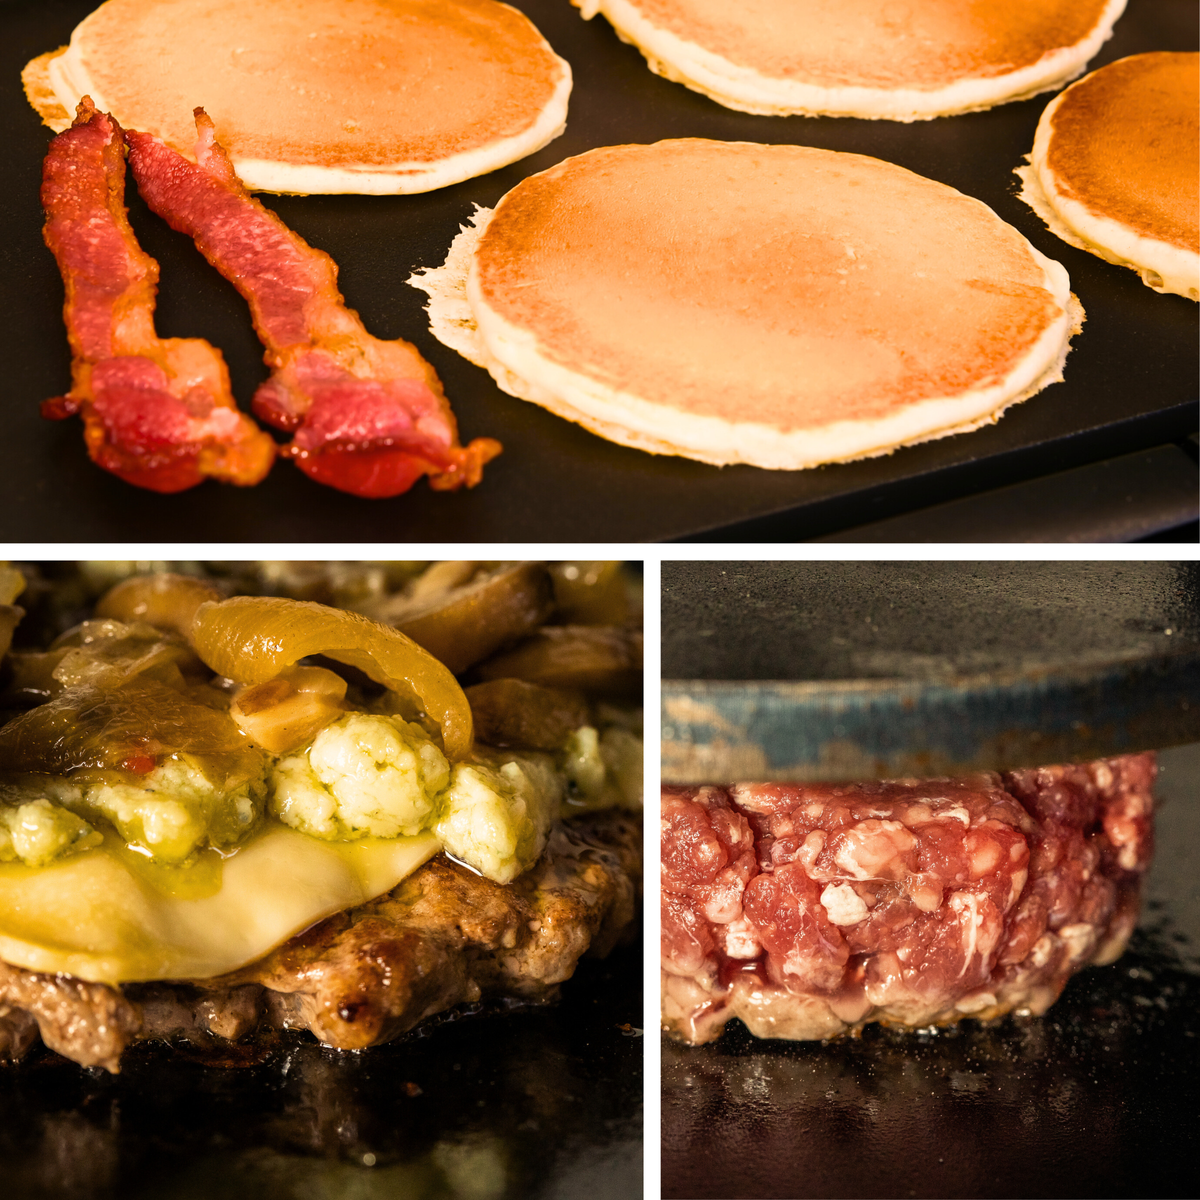 Bacon and pancakes on griddle, burger with toppings, pressing a burger on flat top grill.